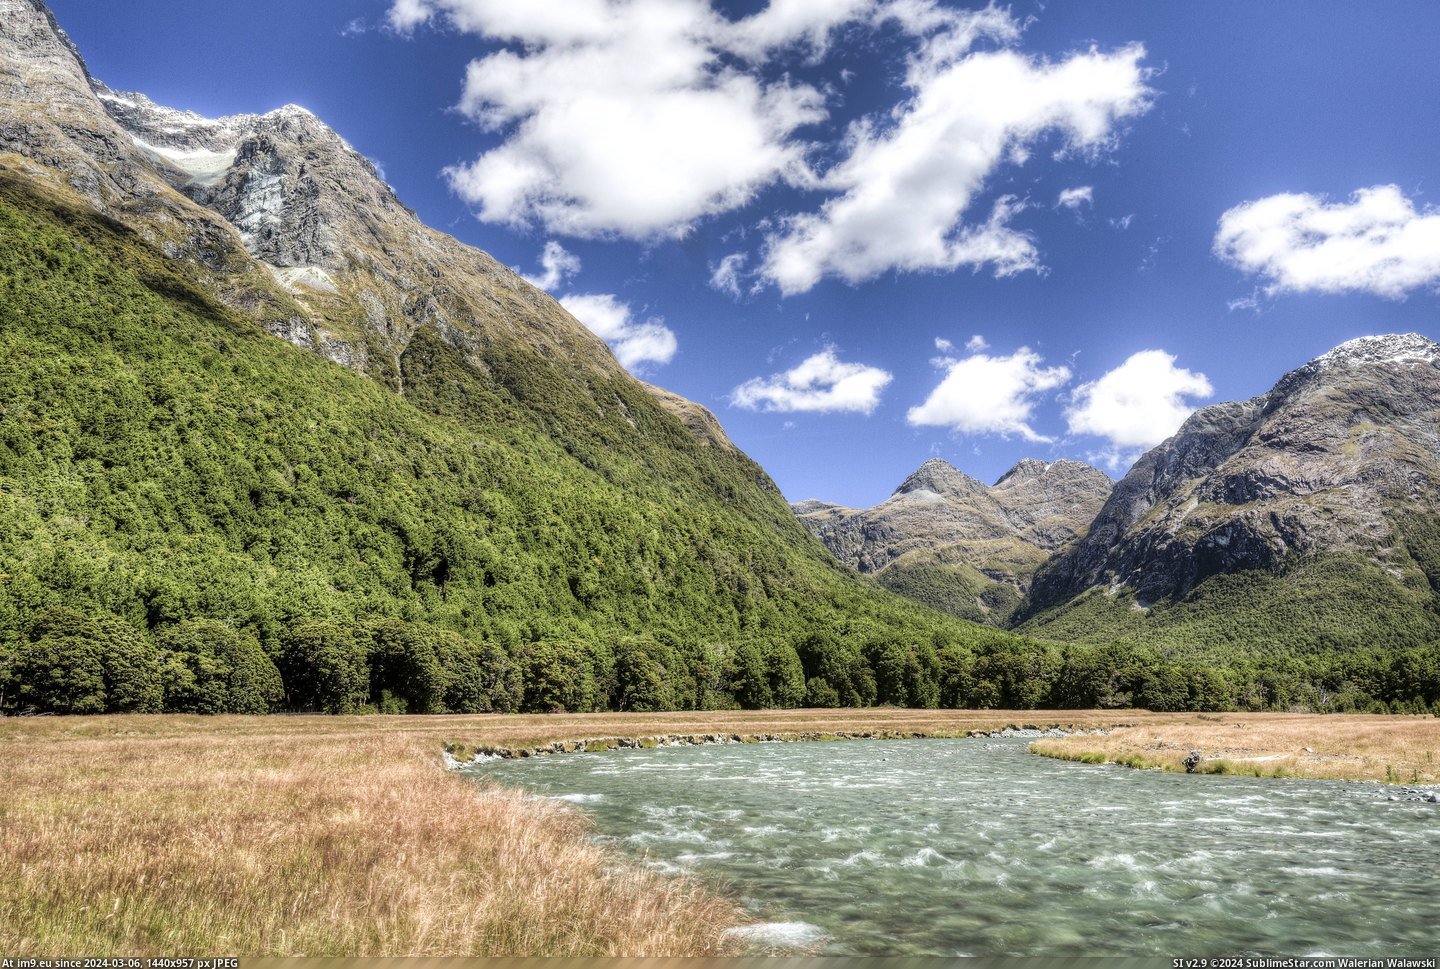 #One #Park #National #Mountains #Eye #Fiordland #Valley #River #Forest [Earthporn] River, Grassland, Forest, and Mountains of the Caples Valley, Fiordland National Park  [5558x3704] [One Lidless Eye] Pic. (Obraz z album My r/EARTHPORN favs))